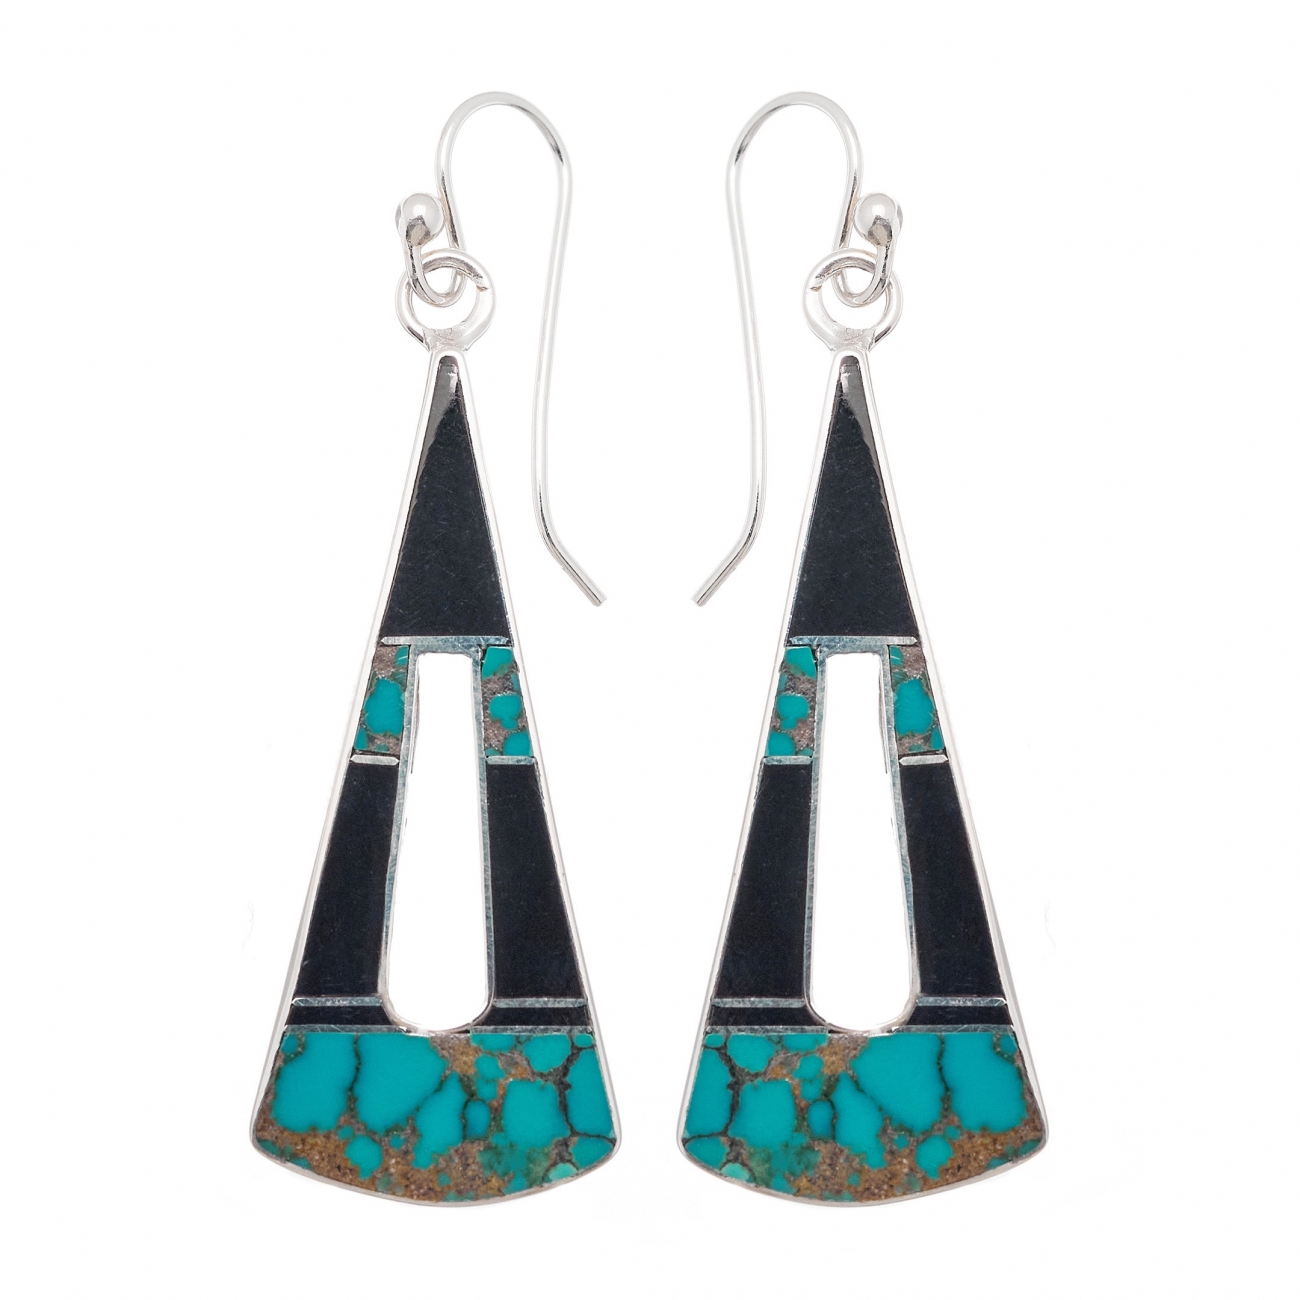 Harpo Paris earrings BO241 in turquoise, black-jet and silver